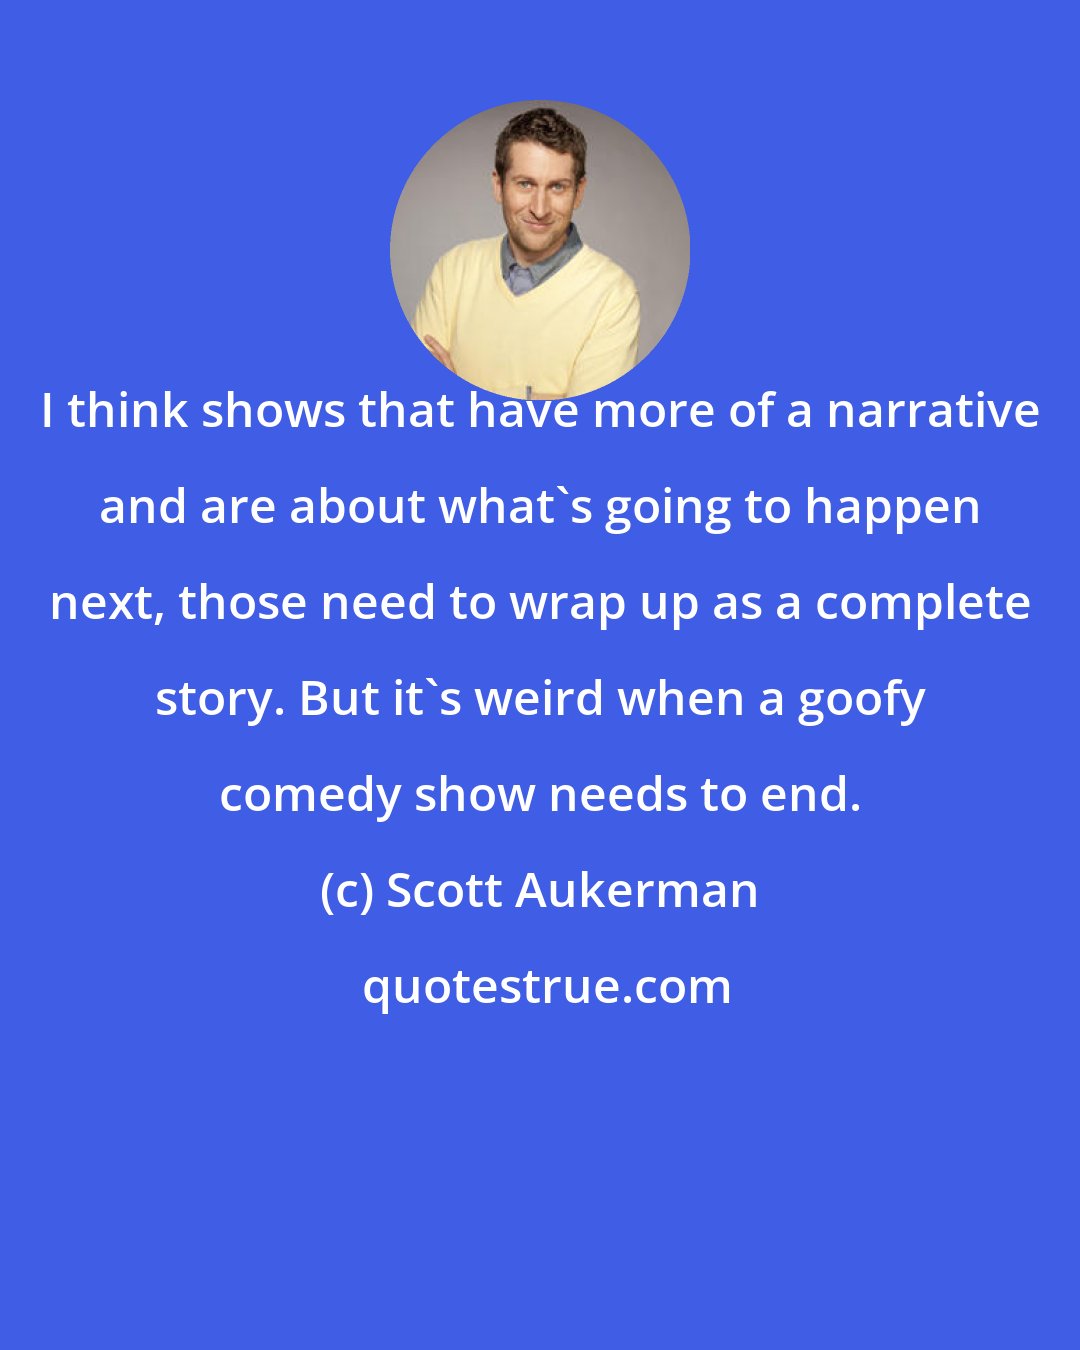 Scott Aukerman: I think shows that have more of a narrative and are about what's going to happen next, those need to wrap up as a complete story. But it's weird when a goofy comedy show needs to end.